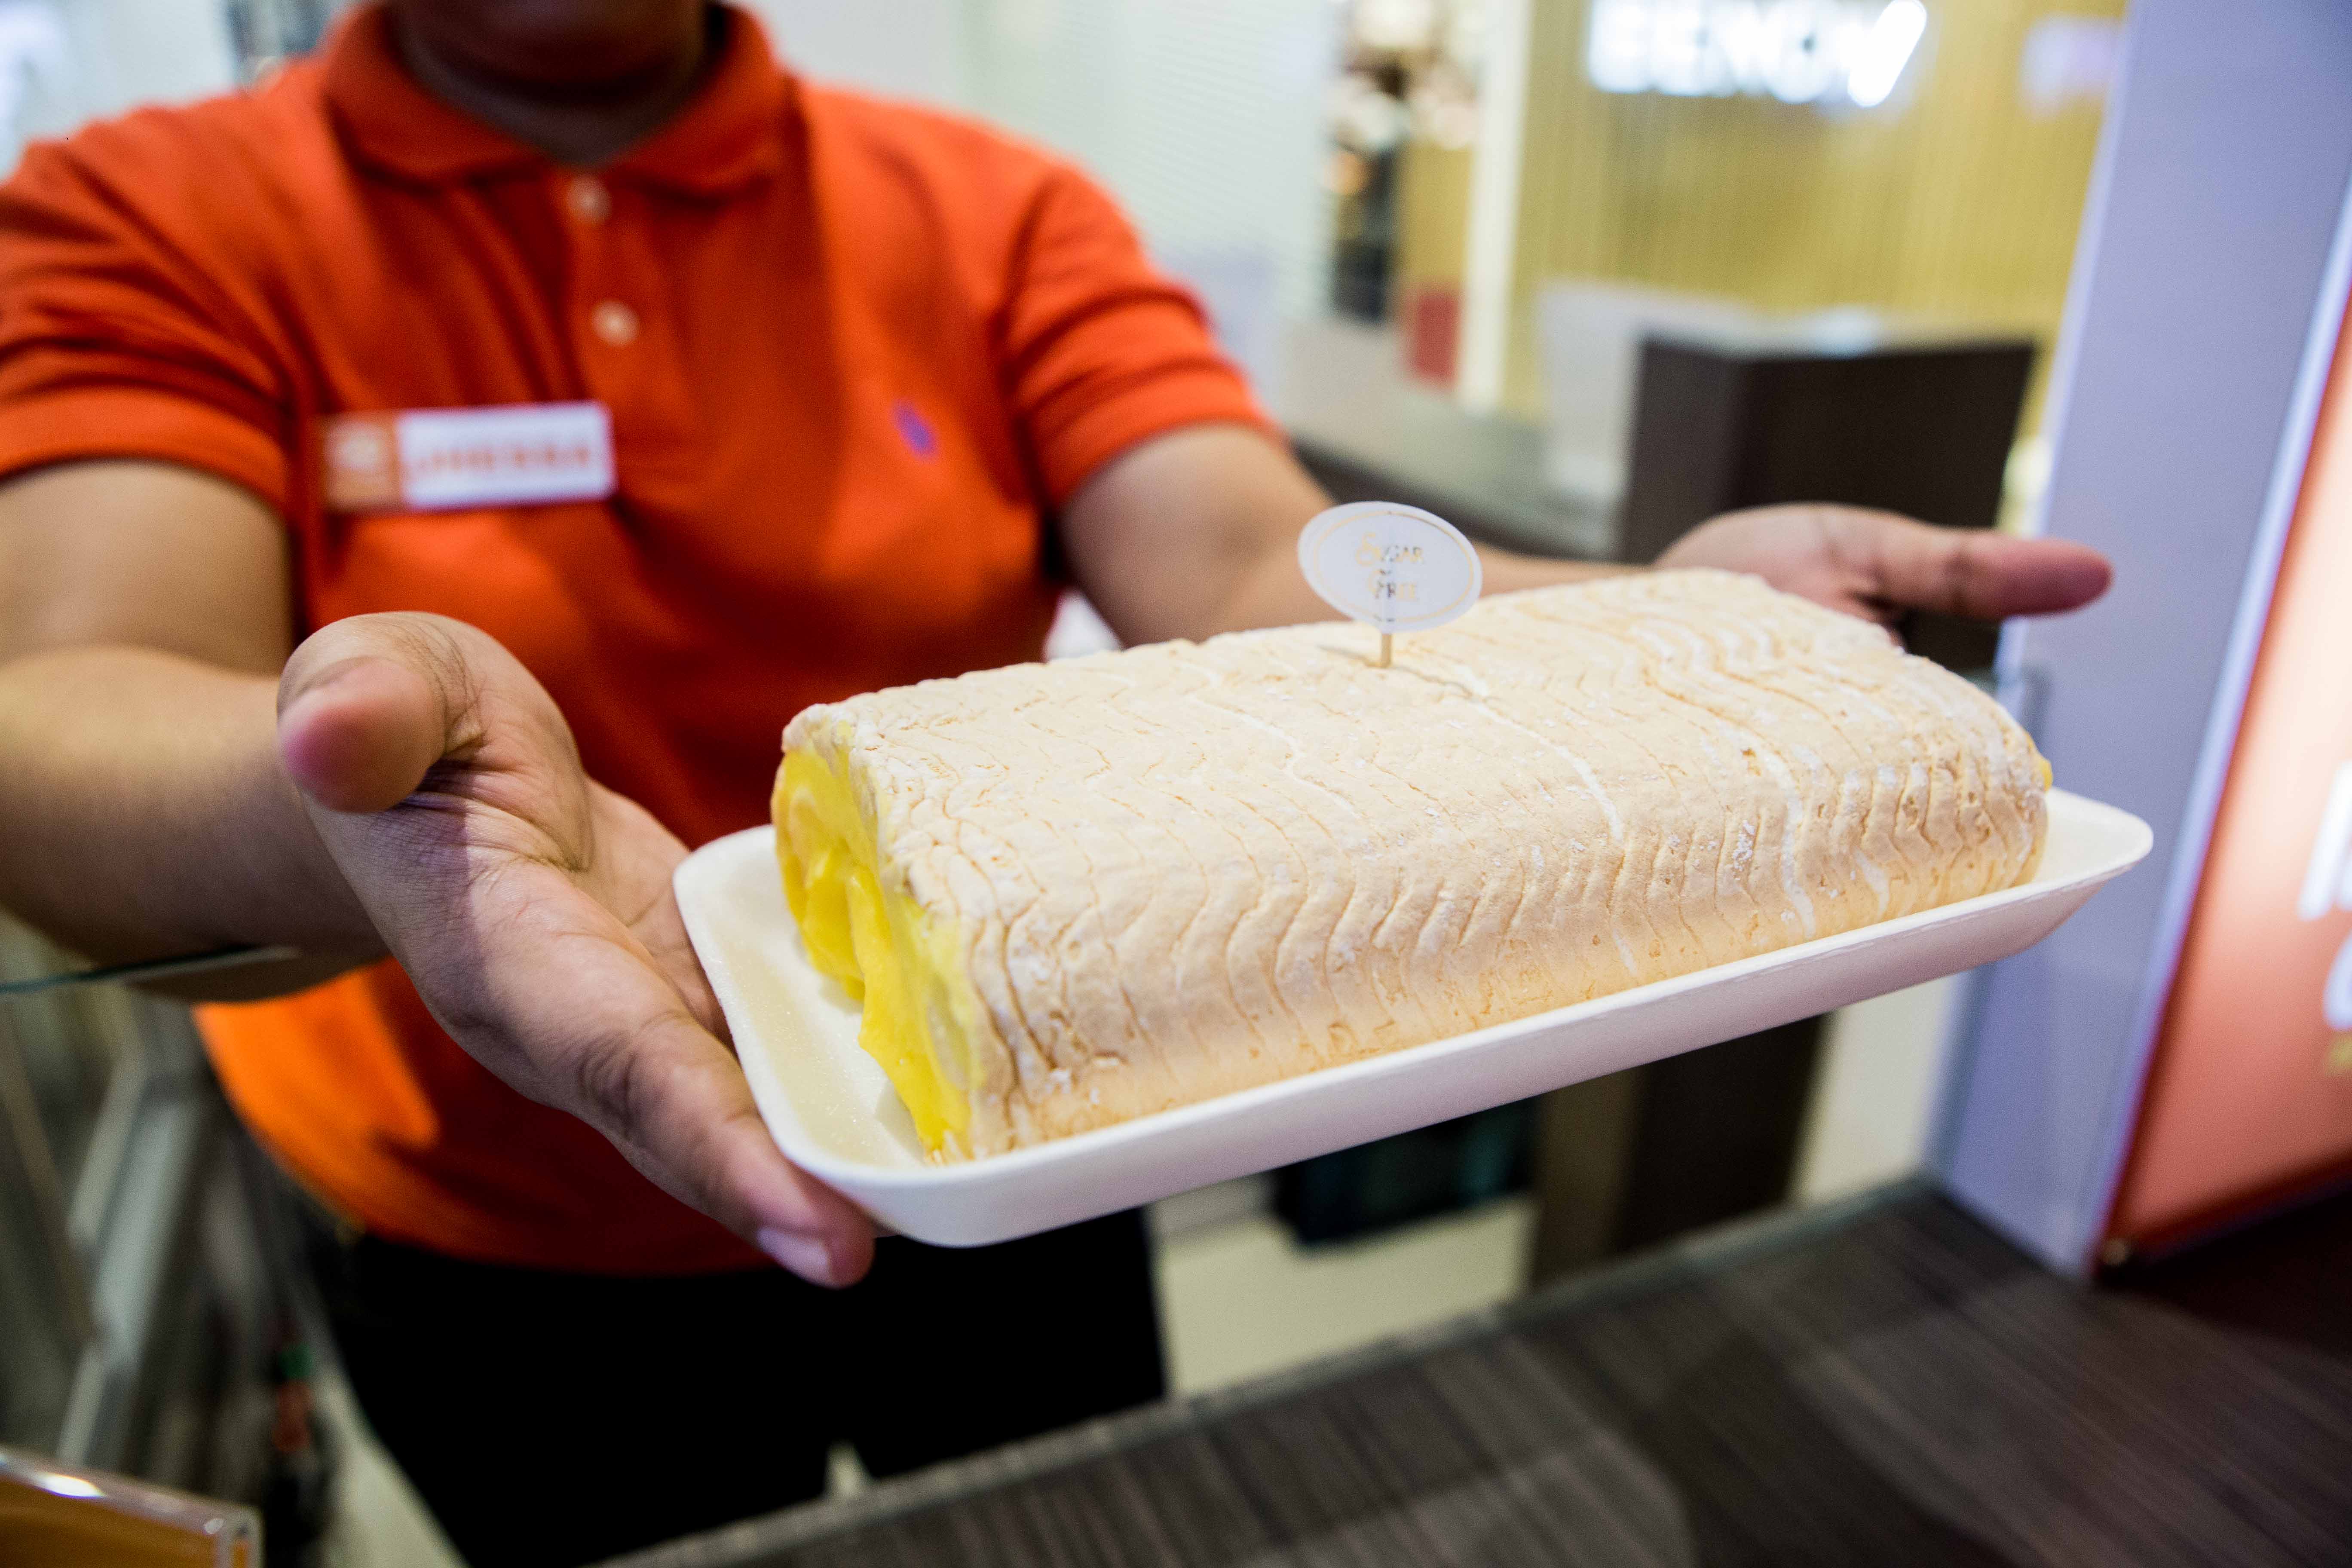 Both the Brazo de Remedios and Brazo de Luna cost P450 for half a roll, and P750 for a whole roll, while the Brazo de Oscar is at P500 for half and P800 for the whole roll.